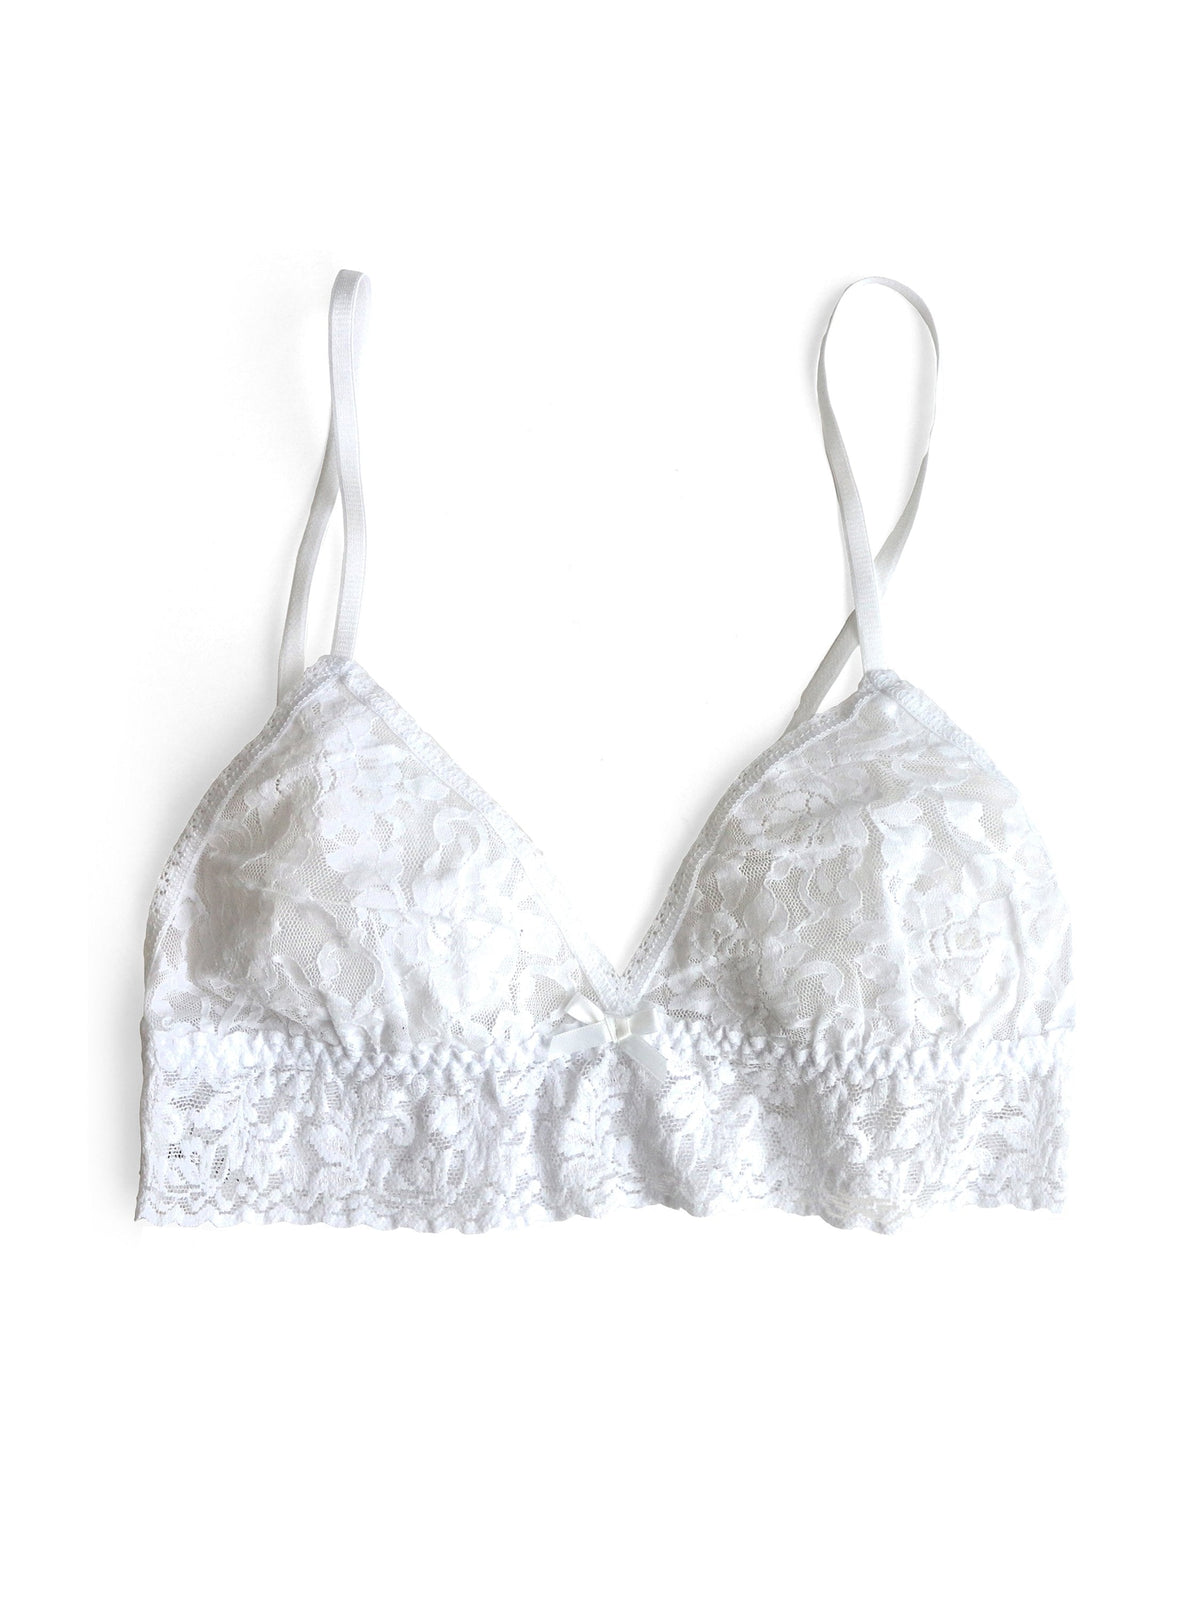 Hanky Panky Signature Lace Triangle Bralette – The Shop at Equinox